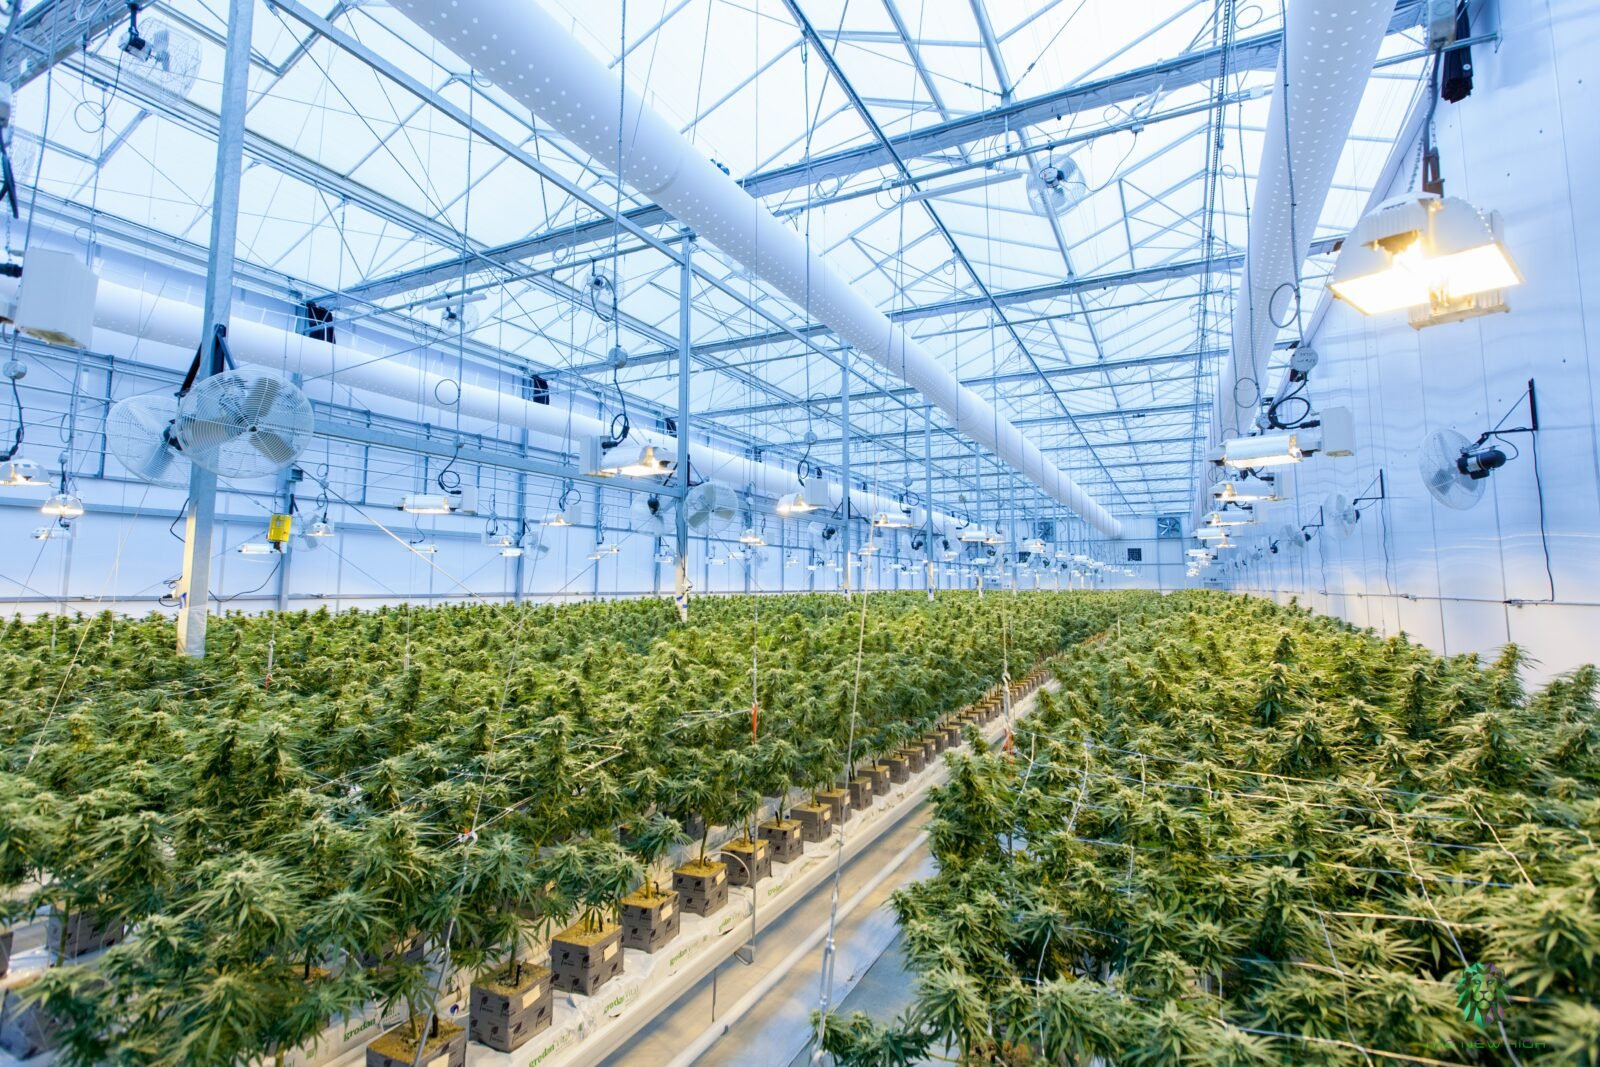 Building a Cannabis Facility from the Ground Up